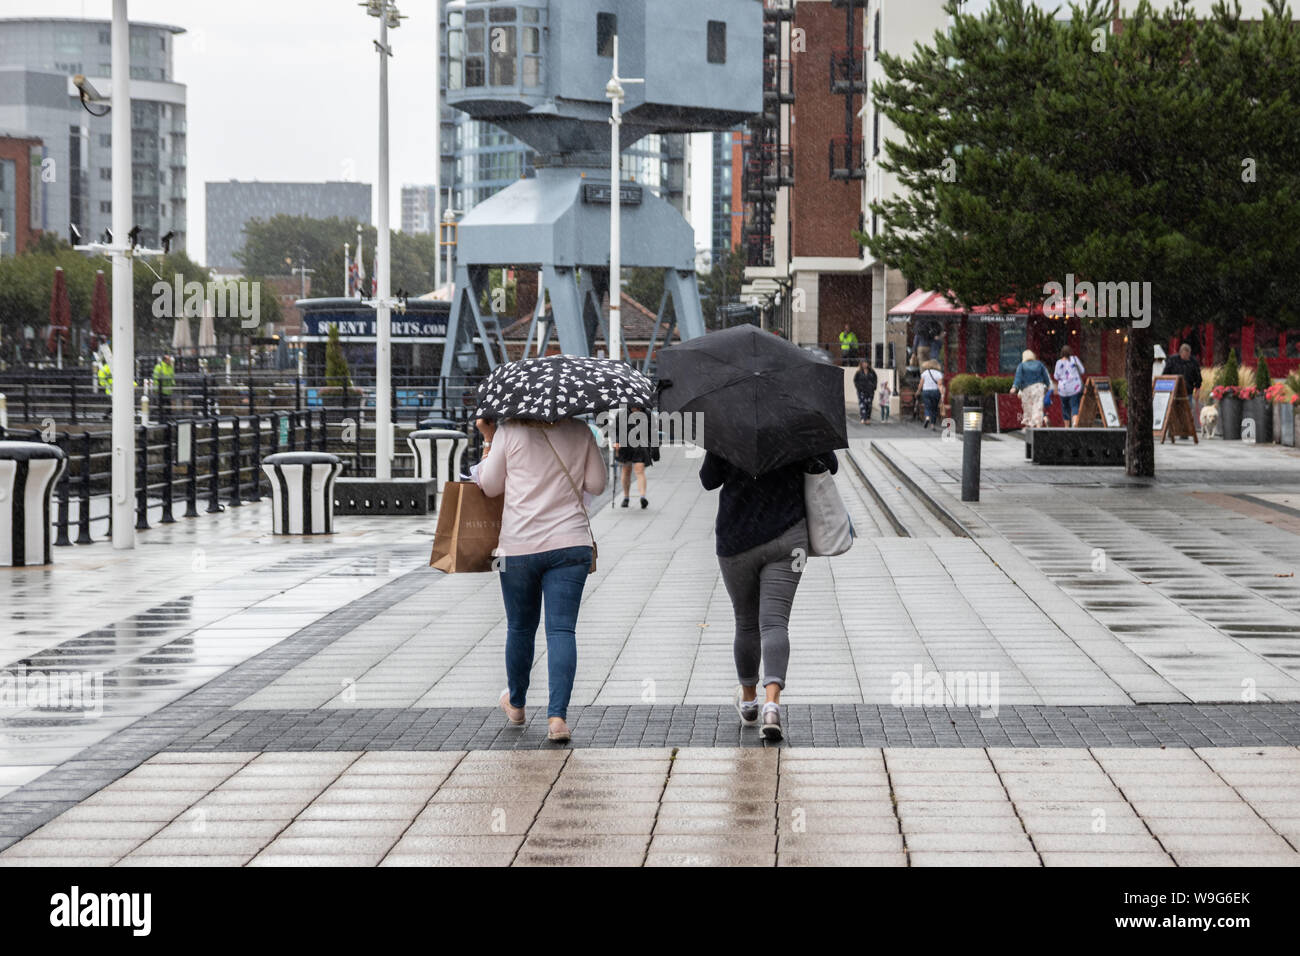 Two women taking shelter from the rain under umbrellas Stock Photo